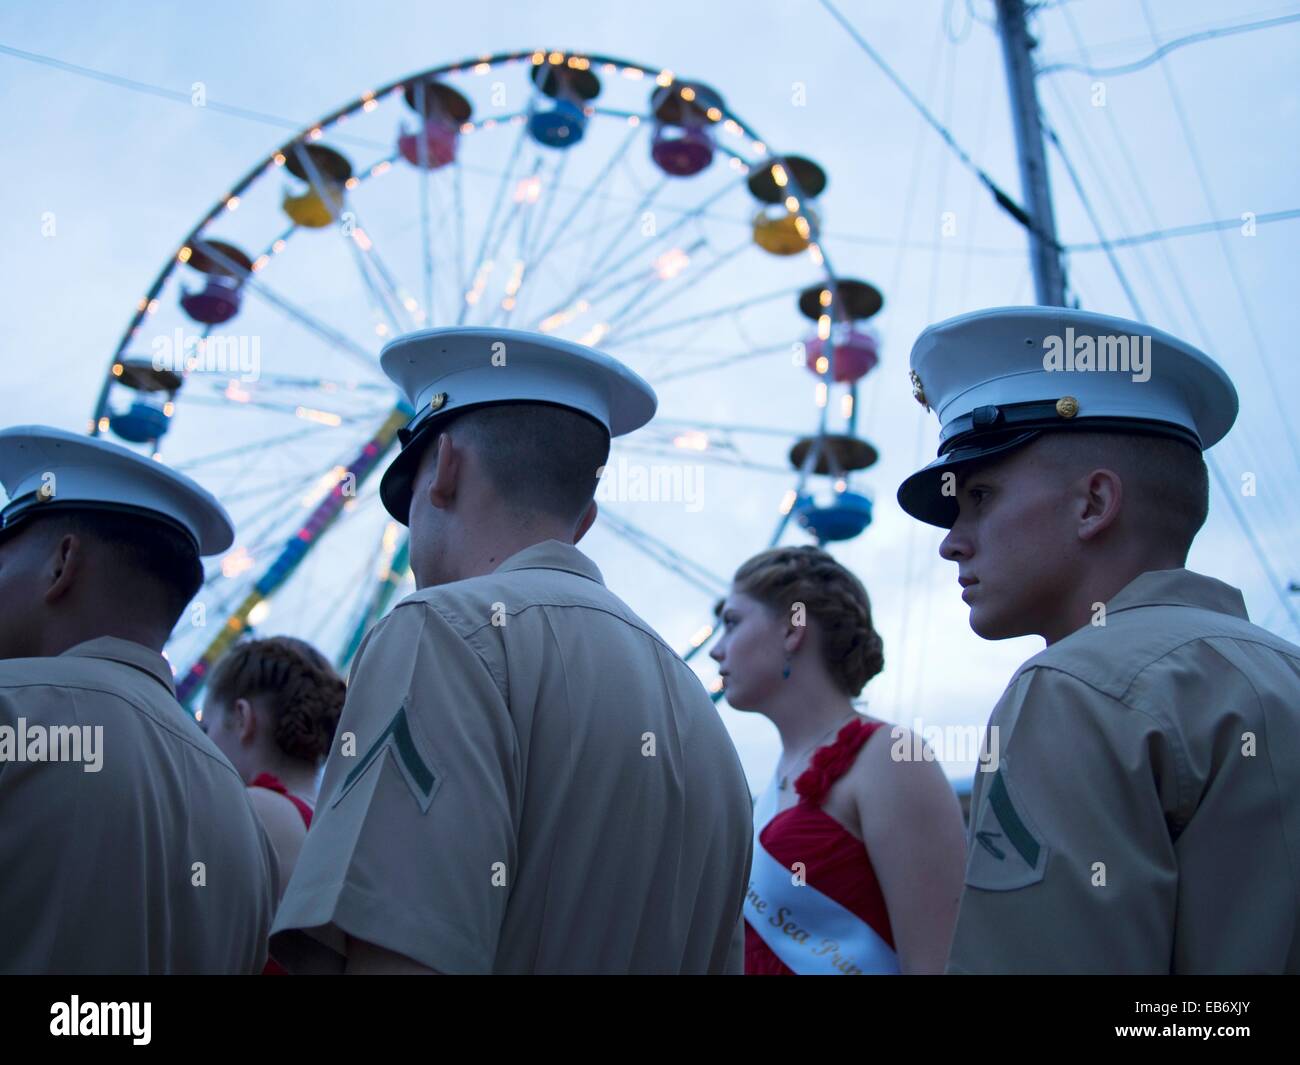 U S  Marines at the carnival at the Maine Lobster Festival in Rockland, Maine, United States. Stock Photo